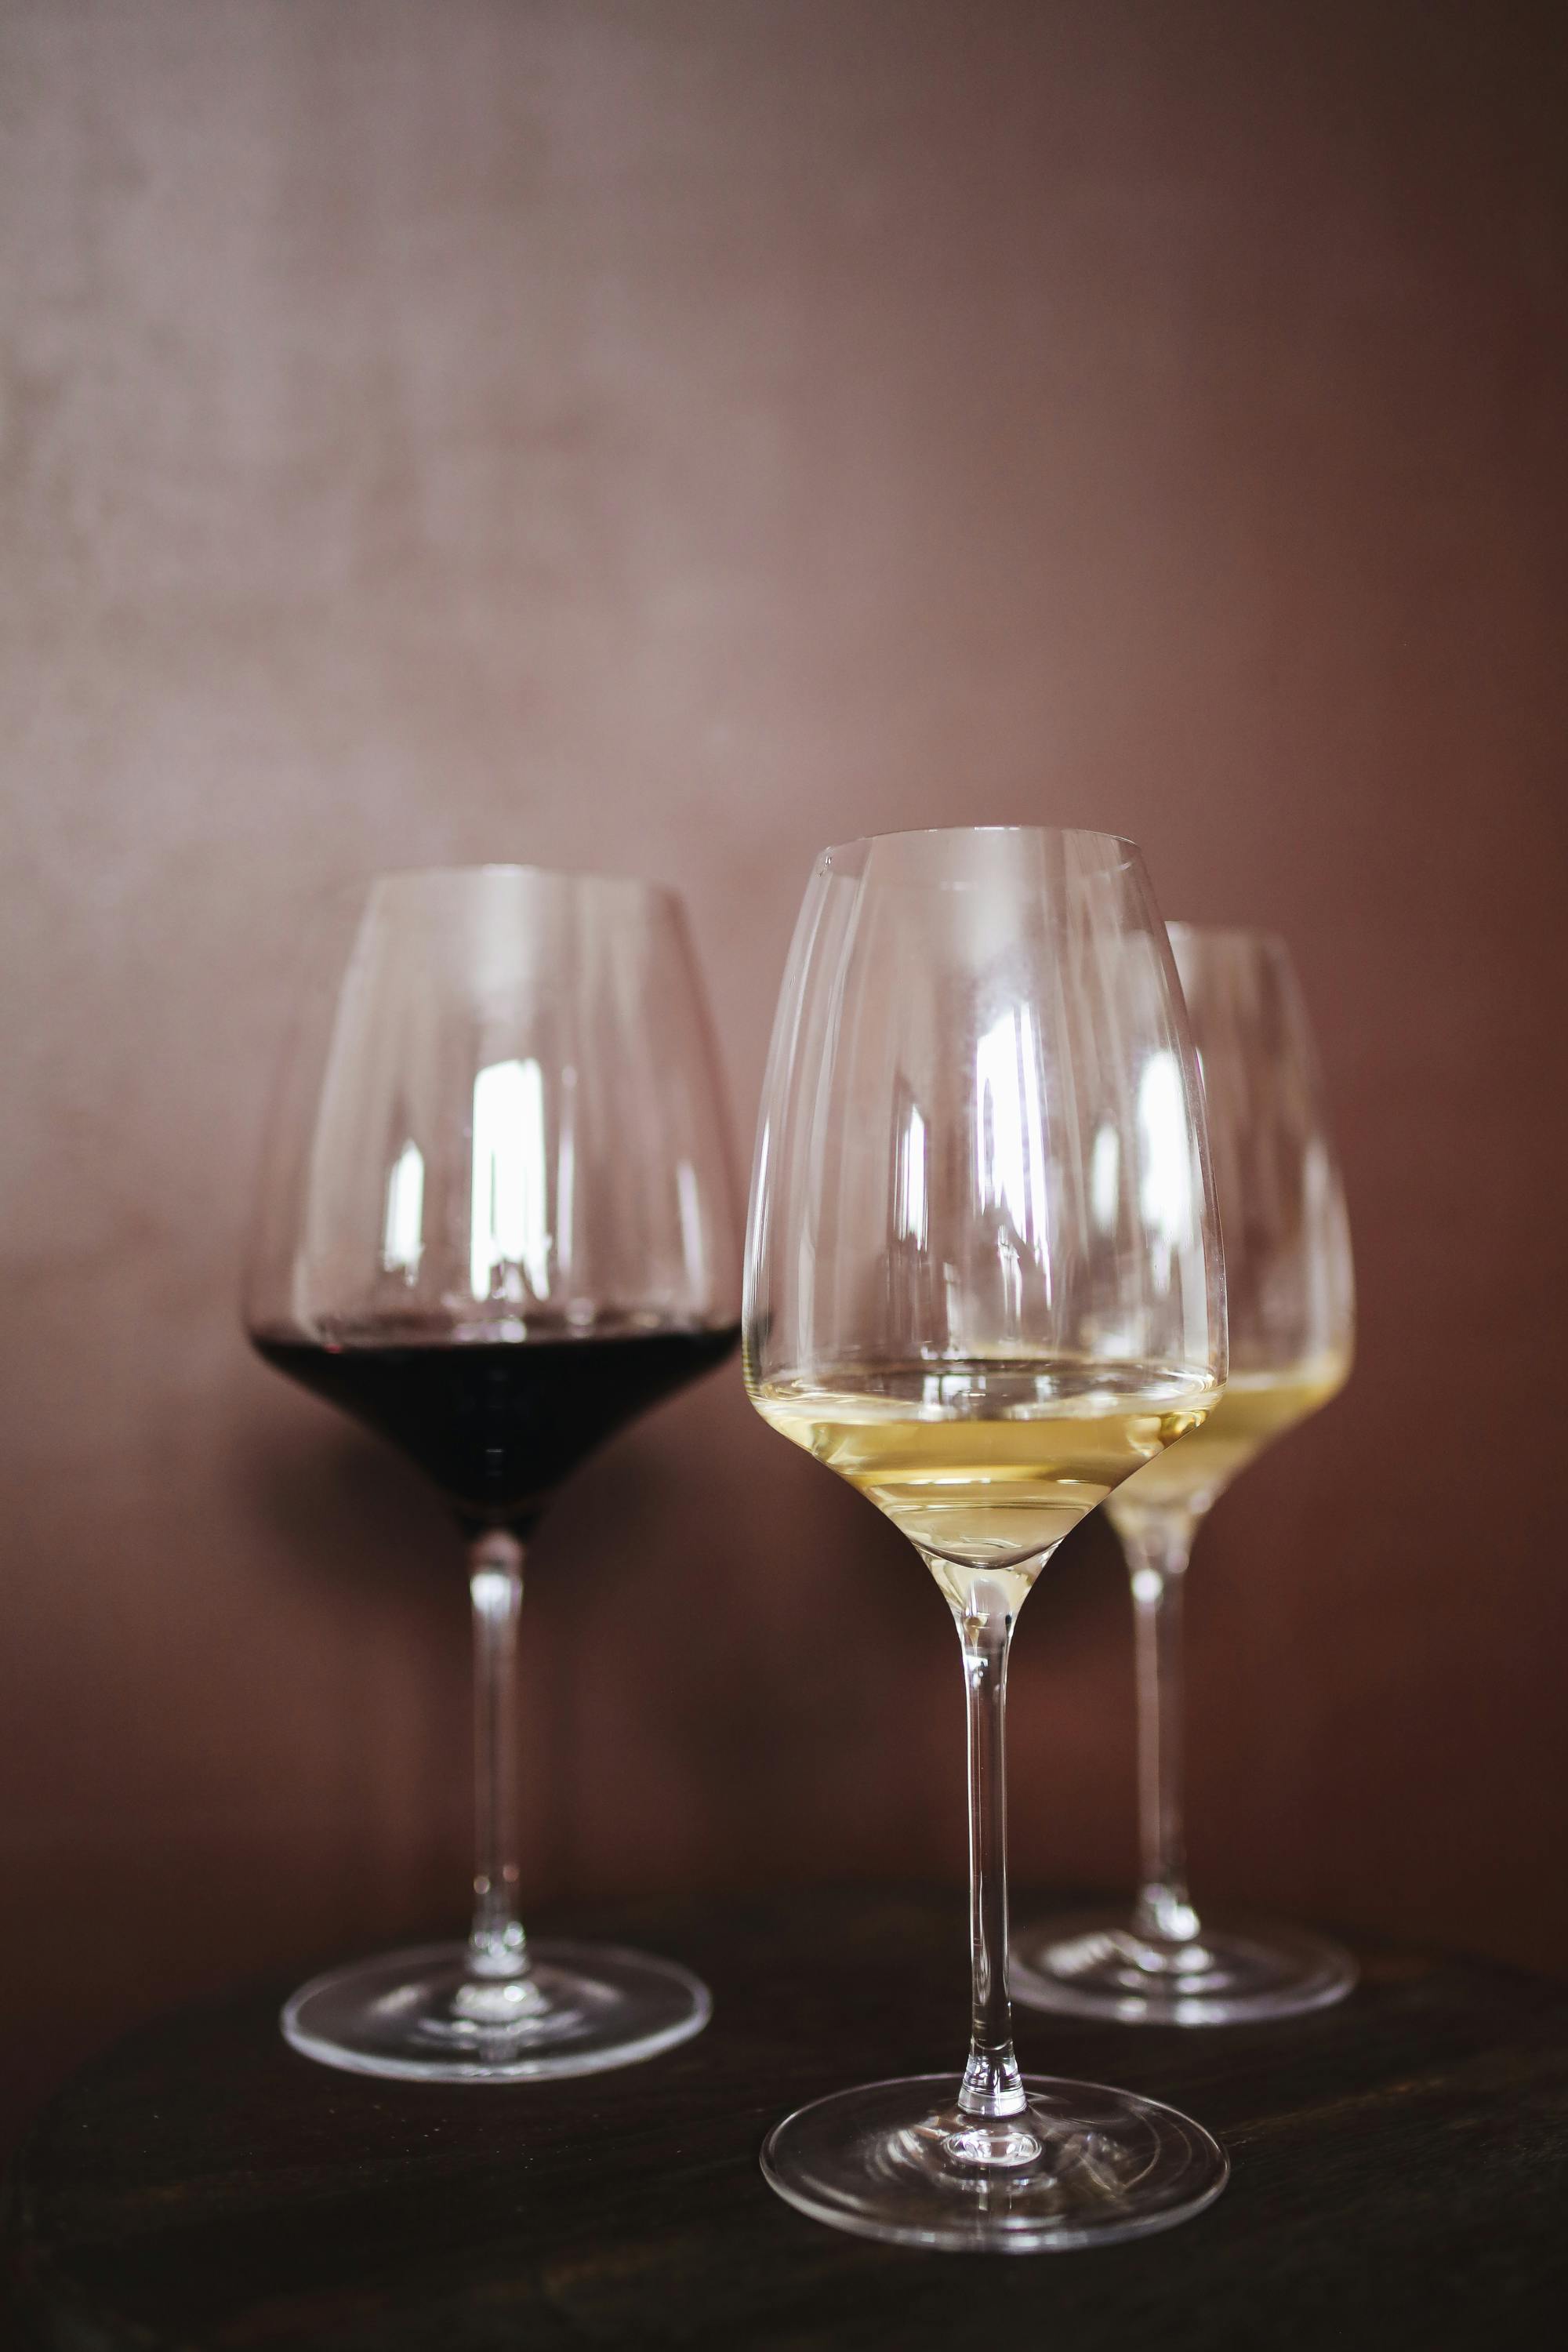 Clear Wine Glasses With Wine · Free Stock Photo